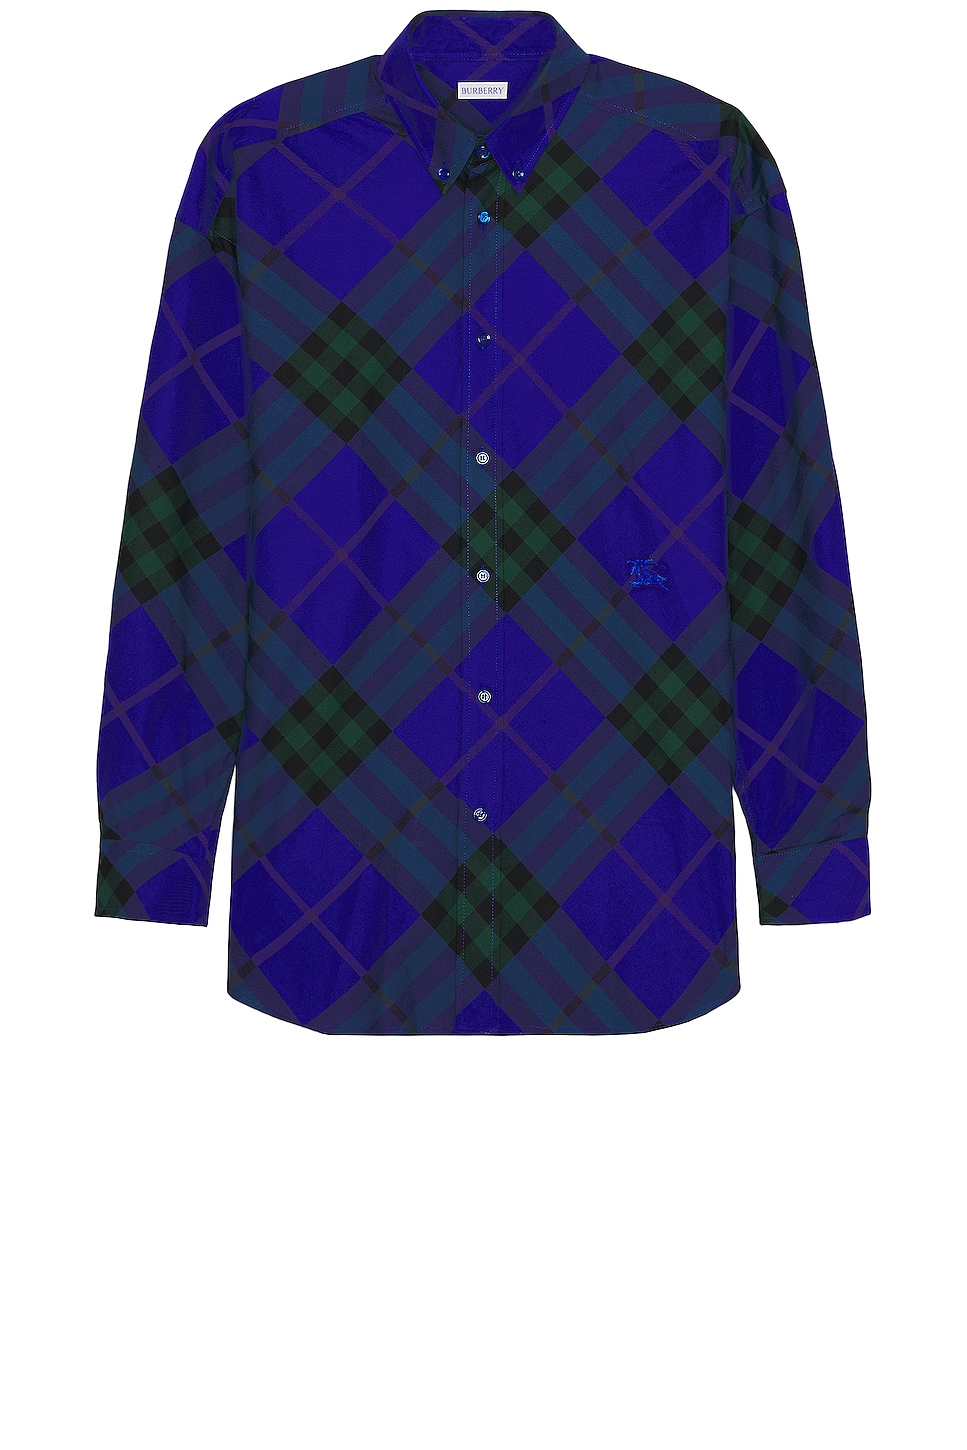 Image 1 of Burberry Long Sleeve Check Pattern Shirt in Knight Ip Check